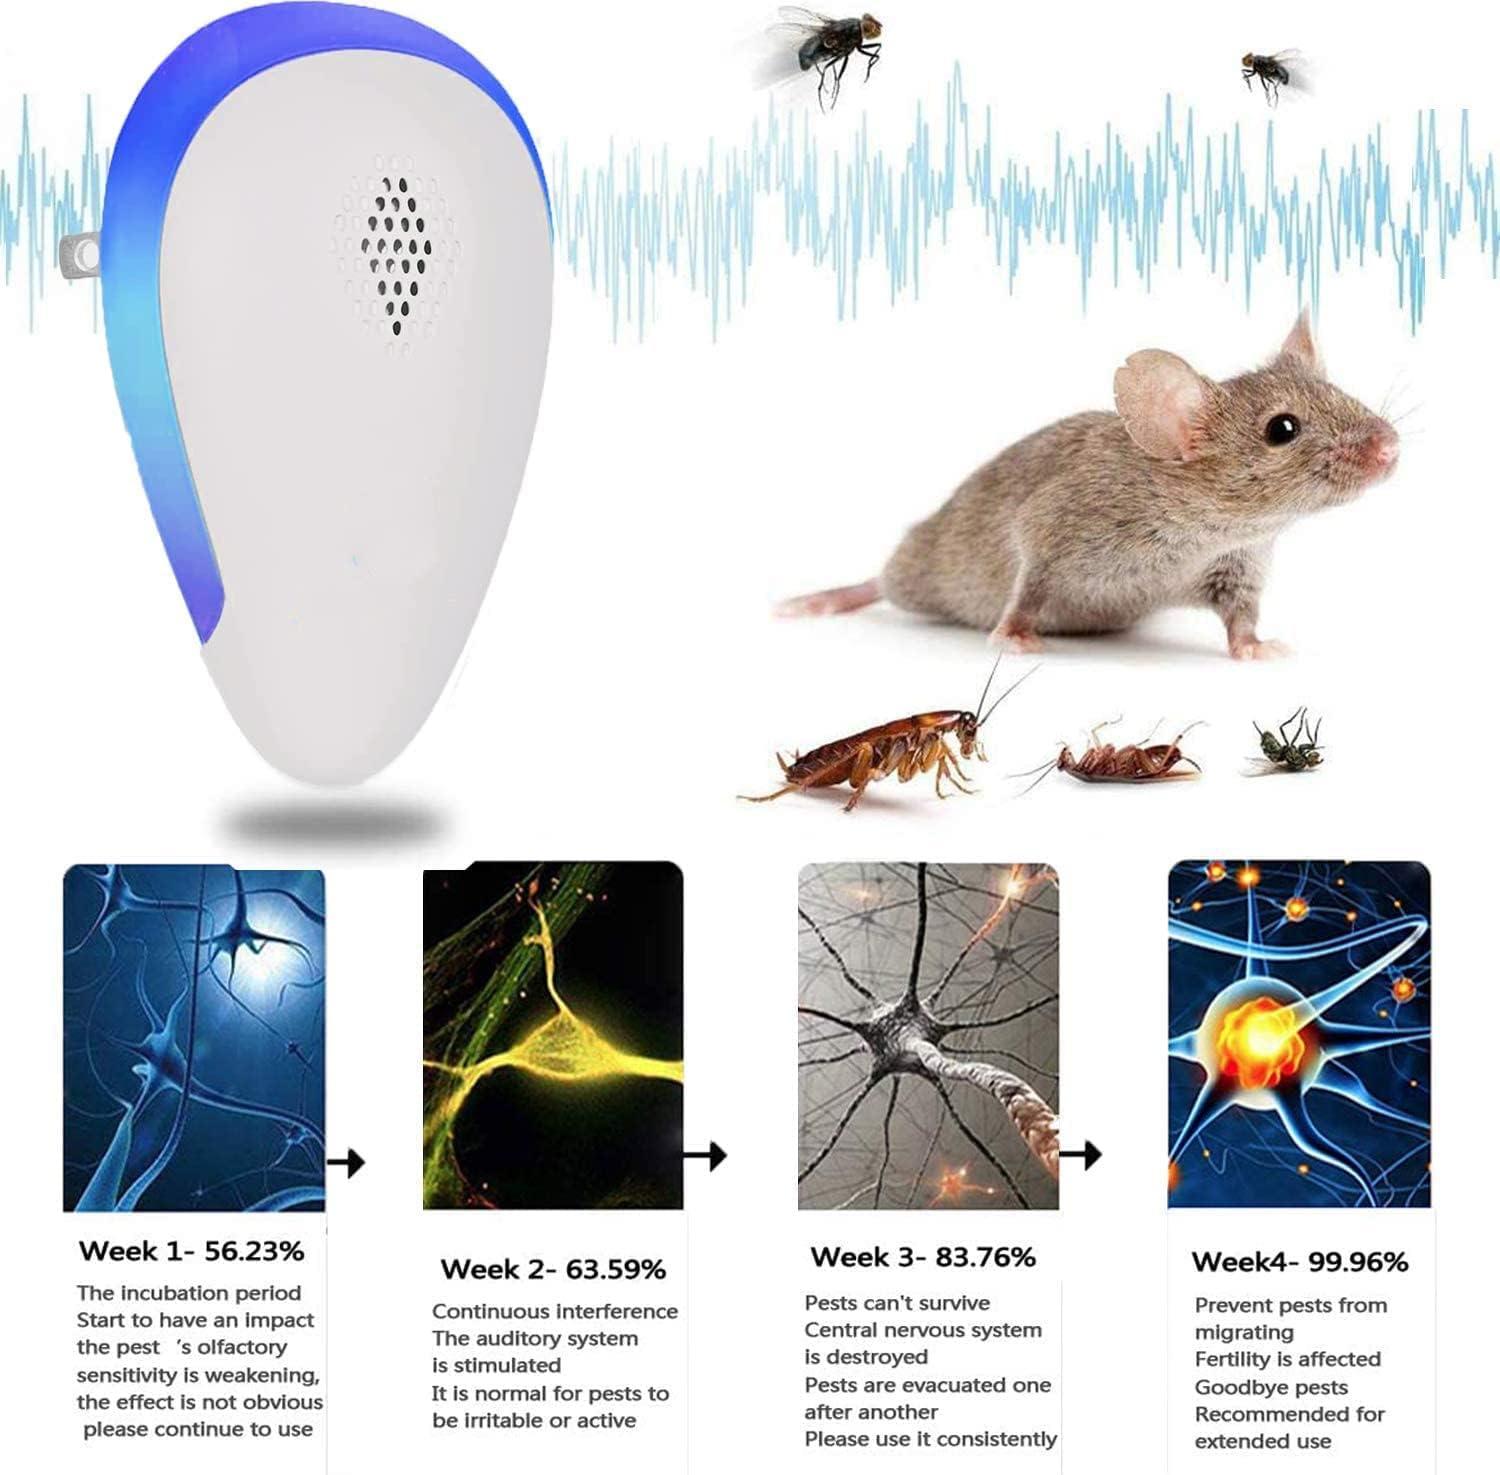 Ultrasonic Pest Repeller, Plug in Insect Repeller, Ultrasonic Pest Control  Repellent Against Mosquitoes, Mice, Spiders, Ants, Rats, Roaches, Bugs